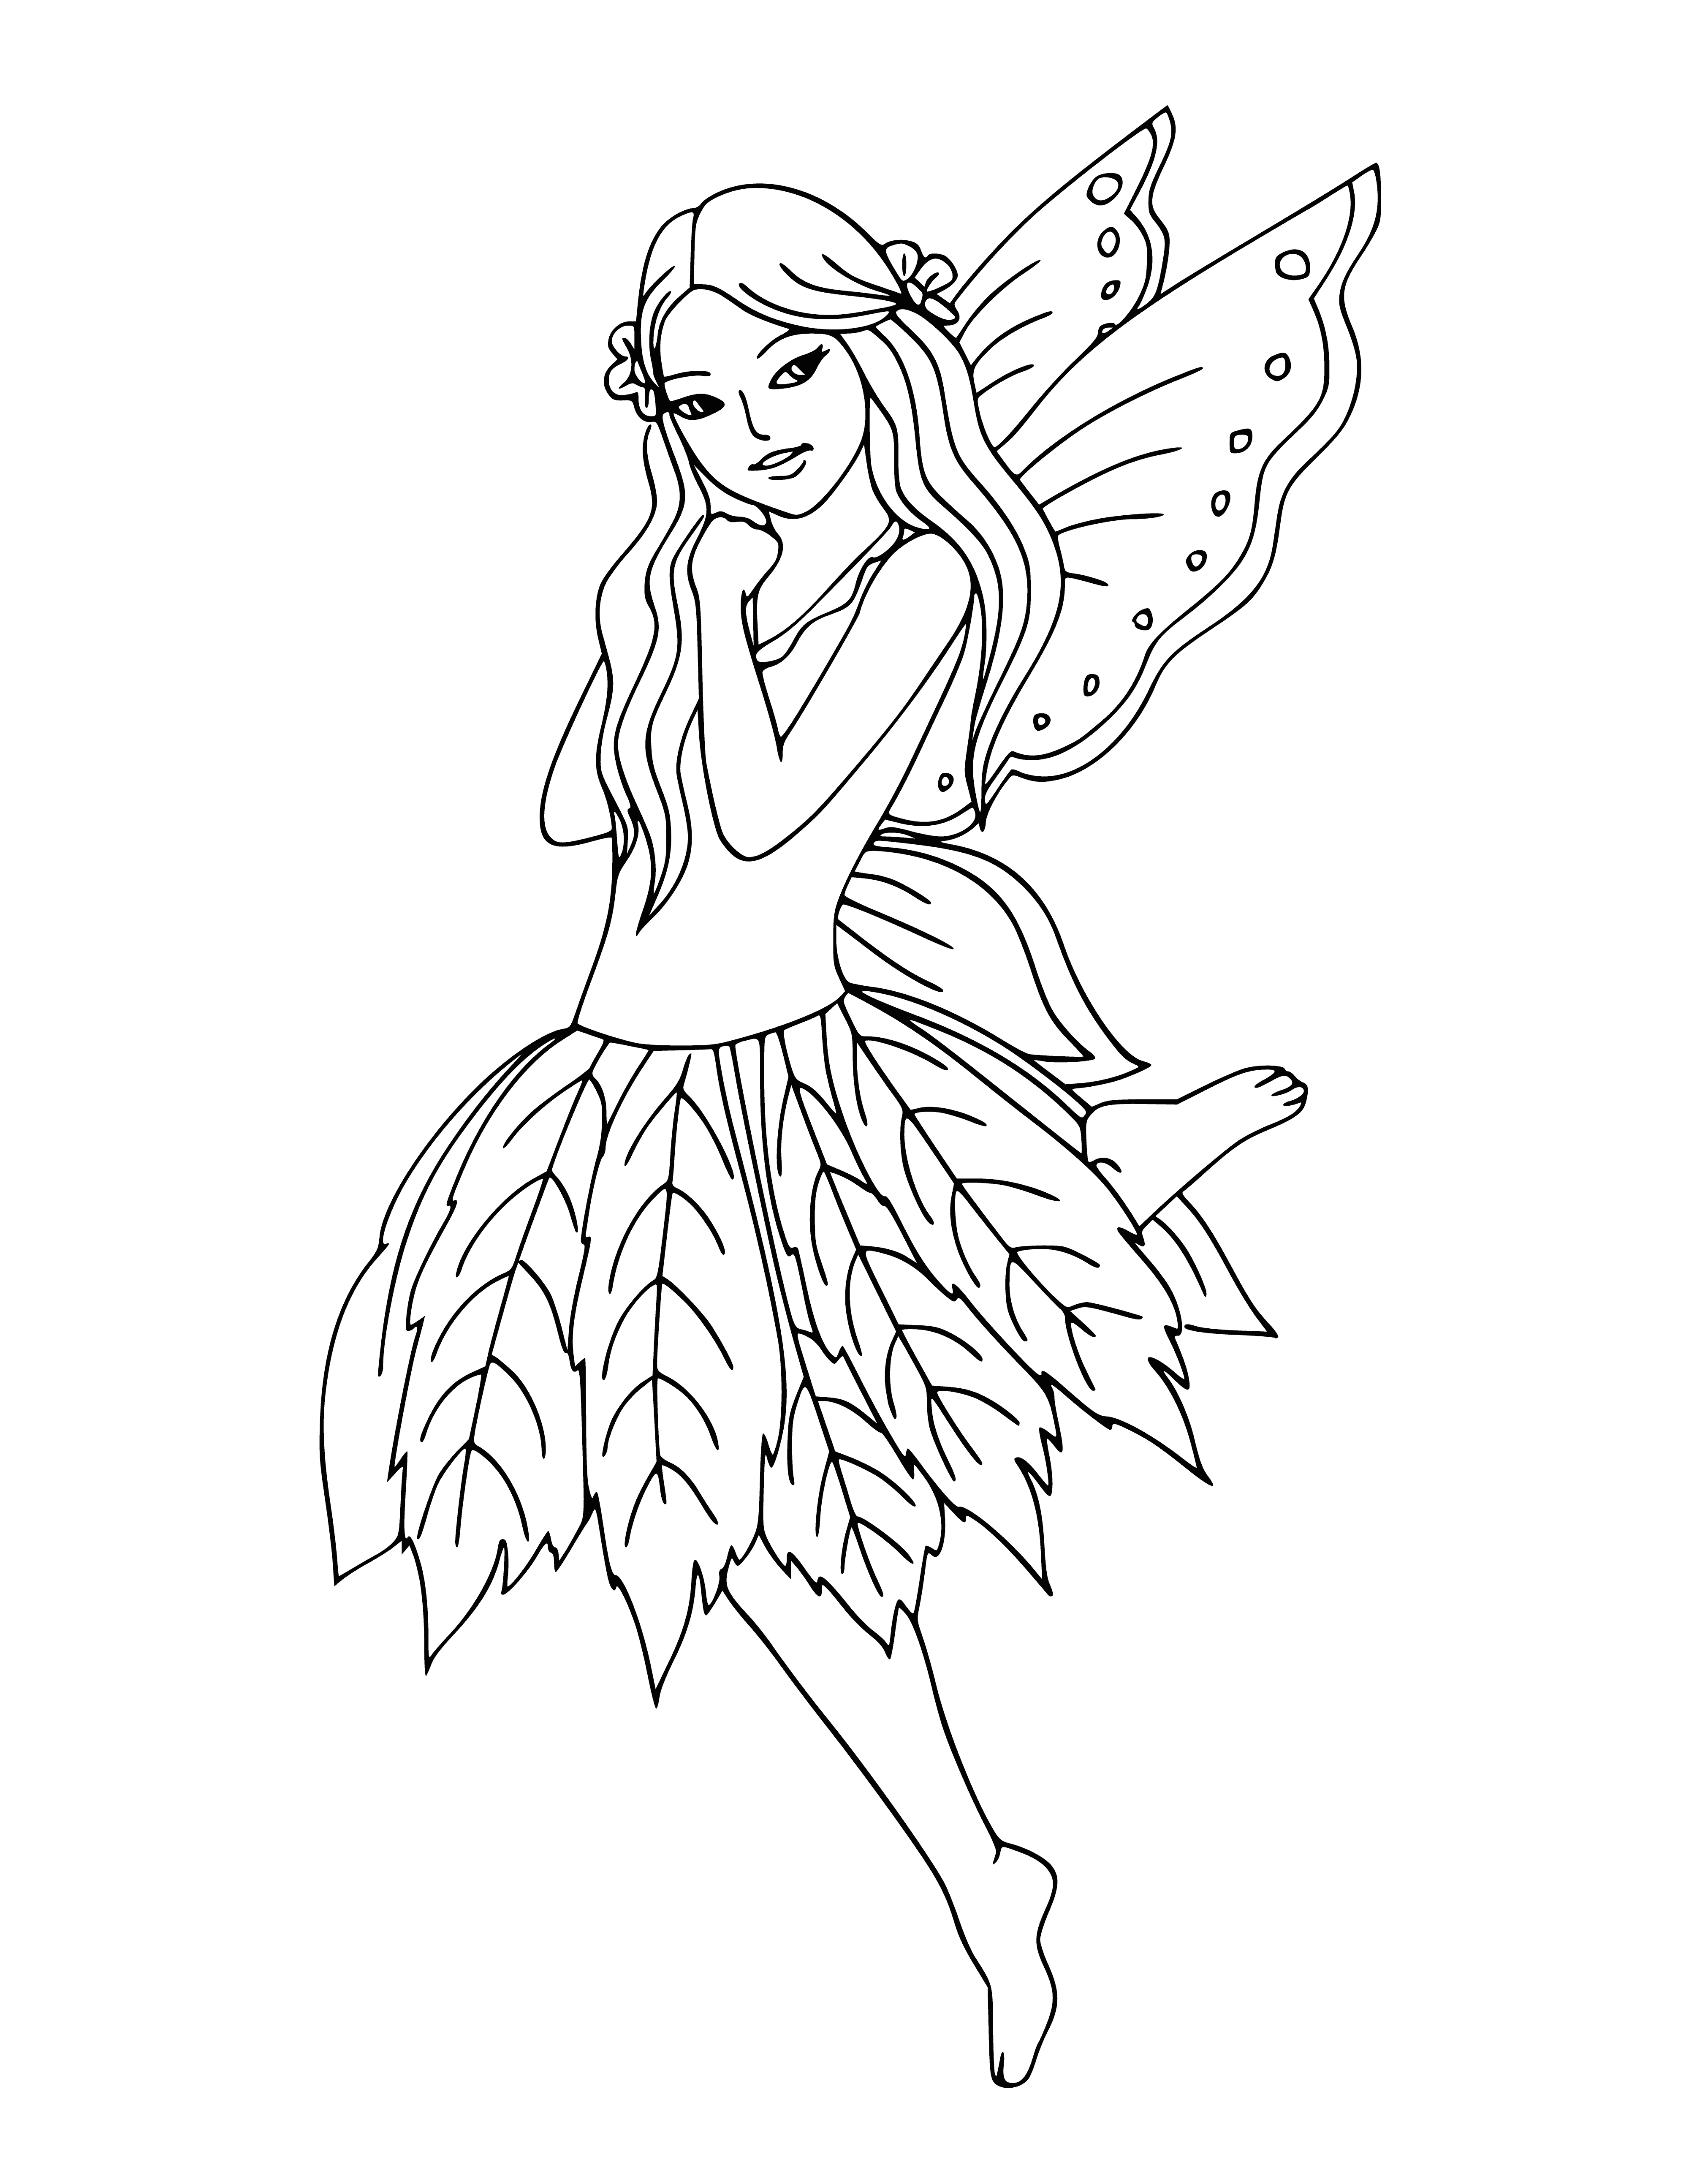 coloring page: Fairy w/ leaf skirt, butterfly wings & wand in hand brings magic & enchantment to the world.